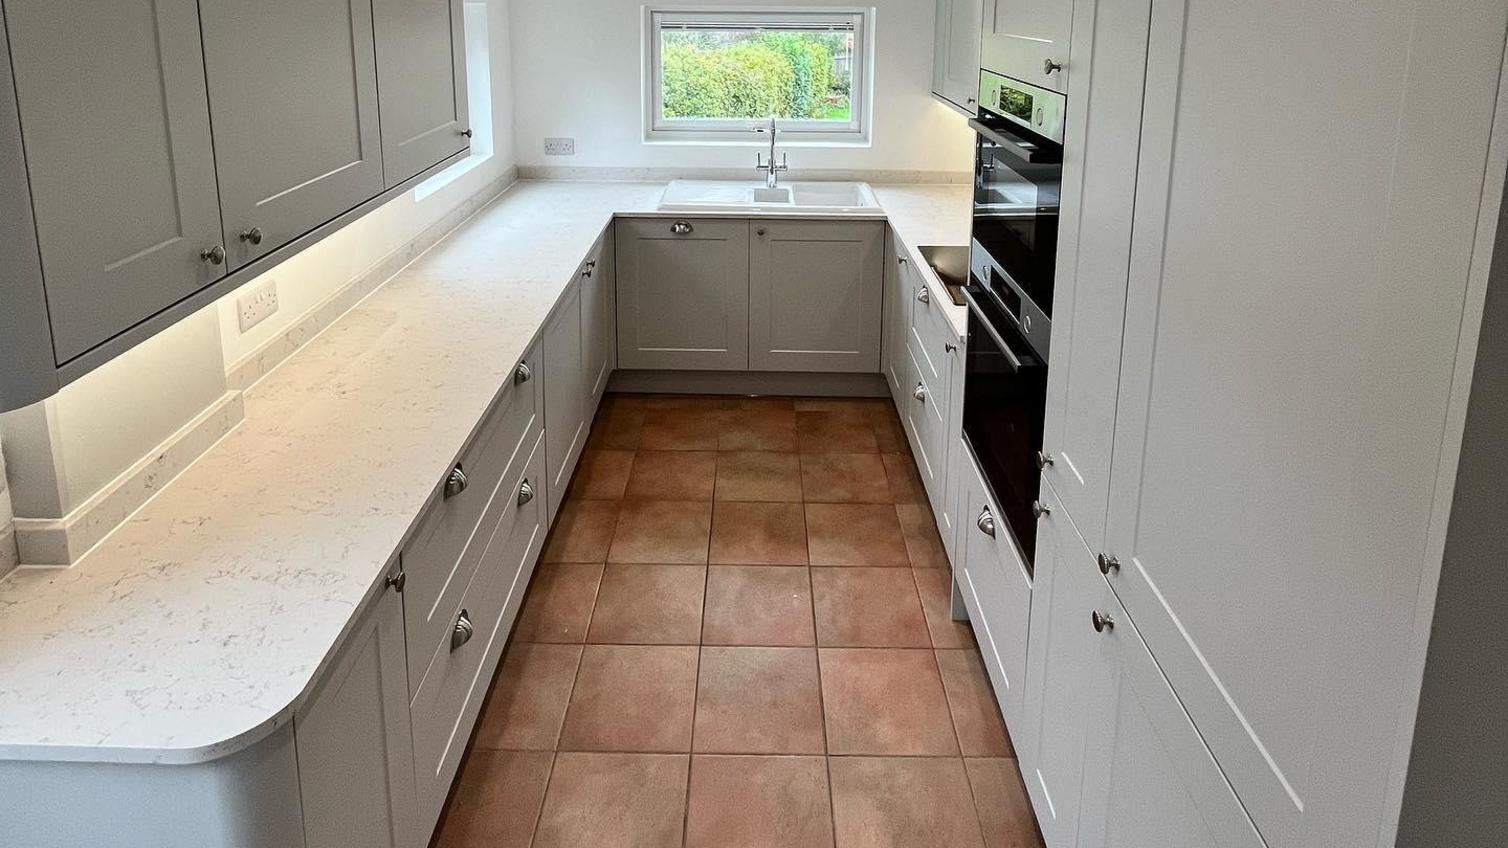 Chelford dove grey shaker kitchen, with white worktops and stone effect flooring.